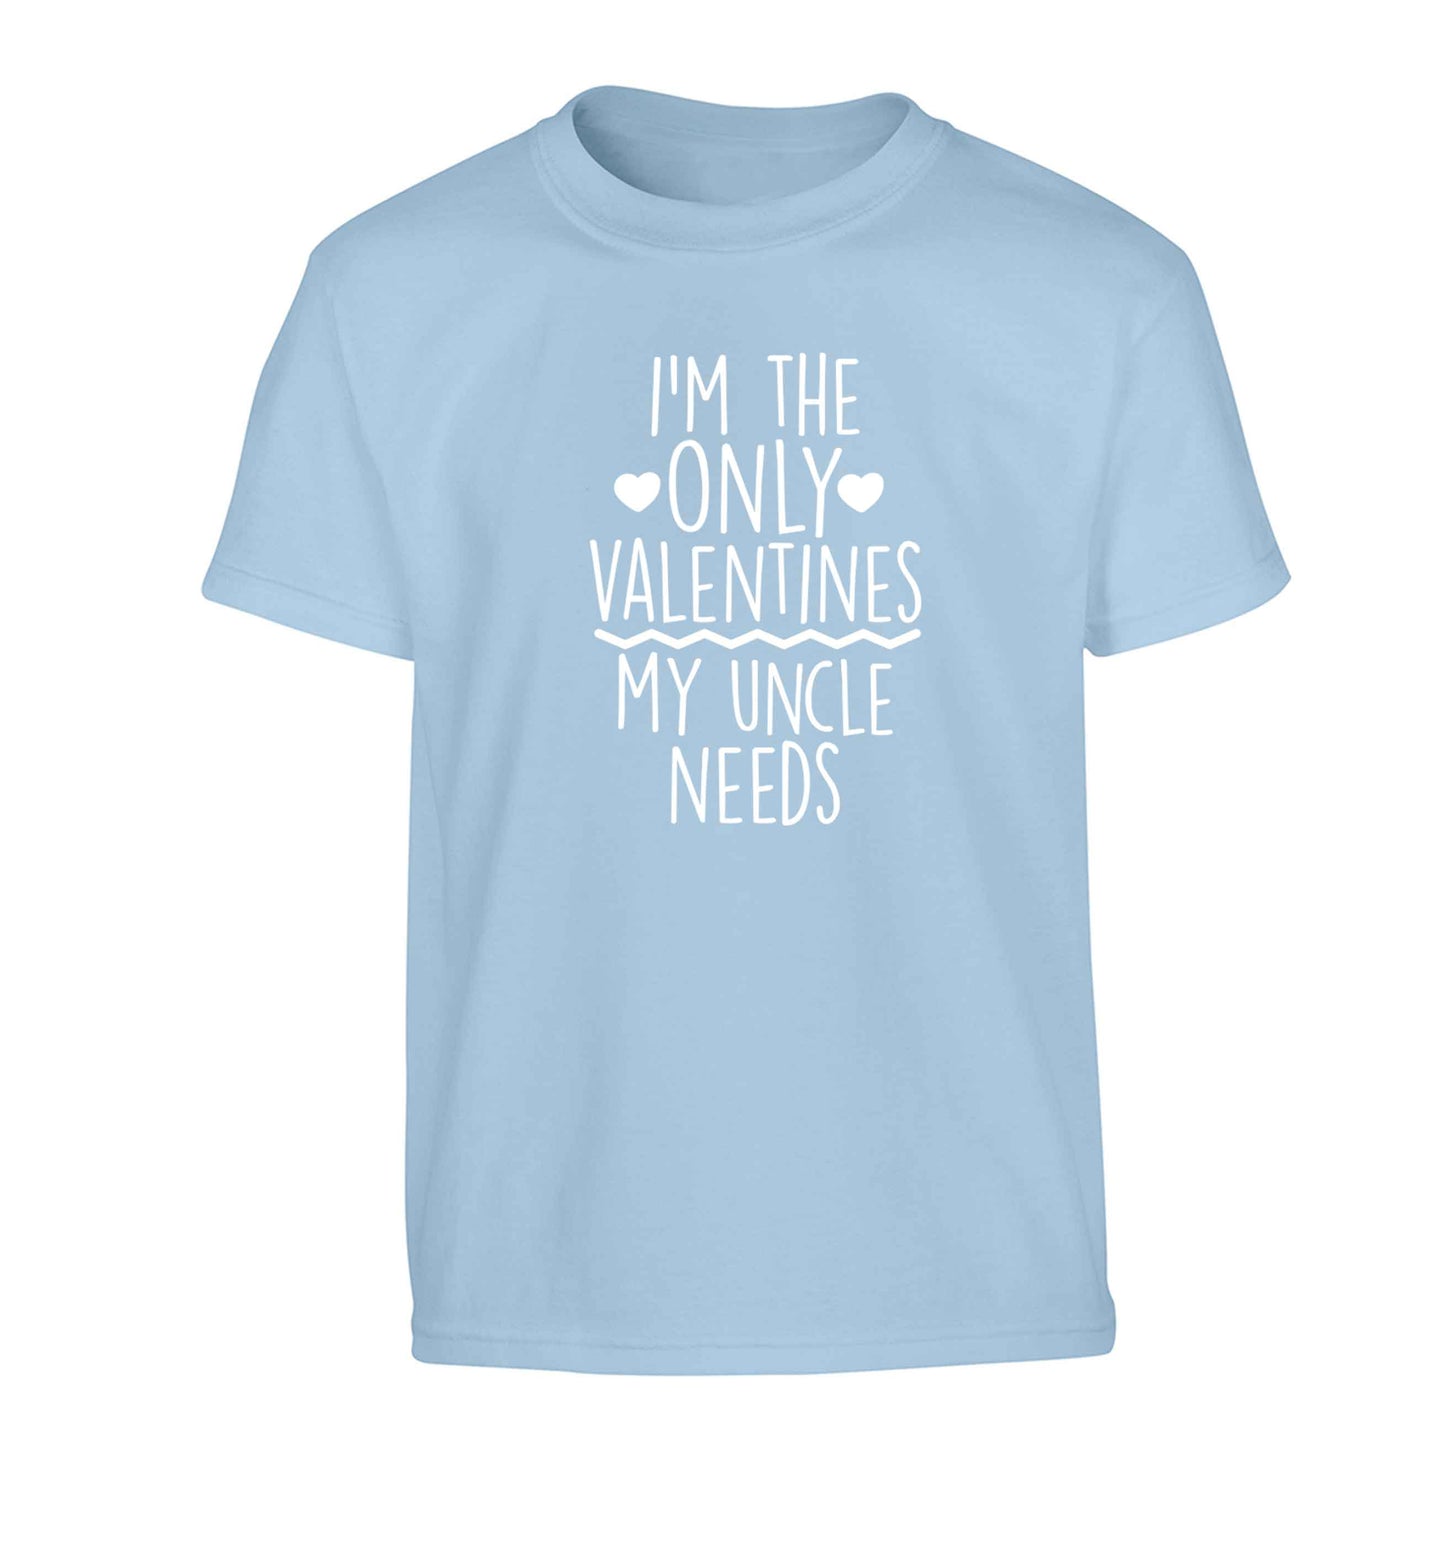 I'm the only valentines my uncle needs Children's light blue Tshirt 12-13 Years